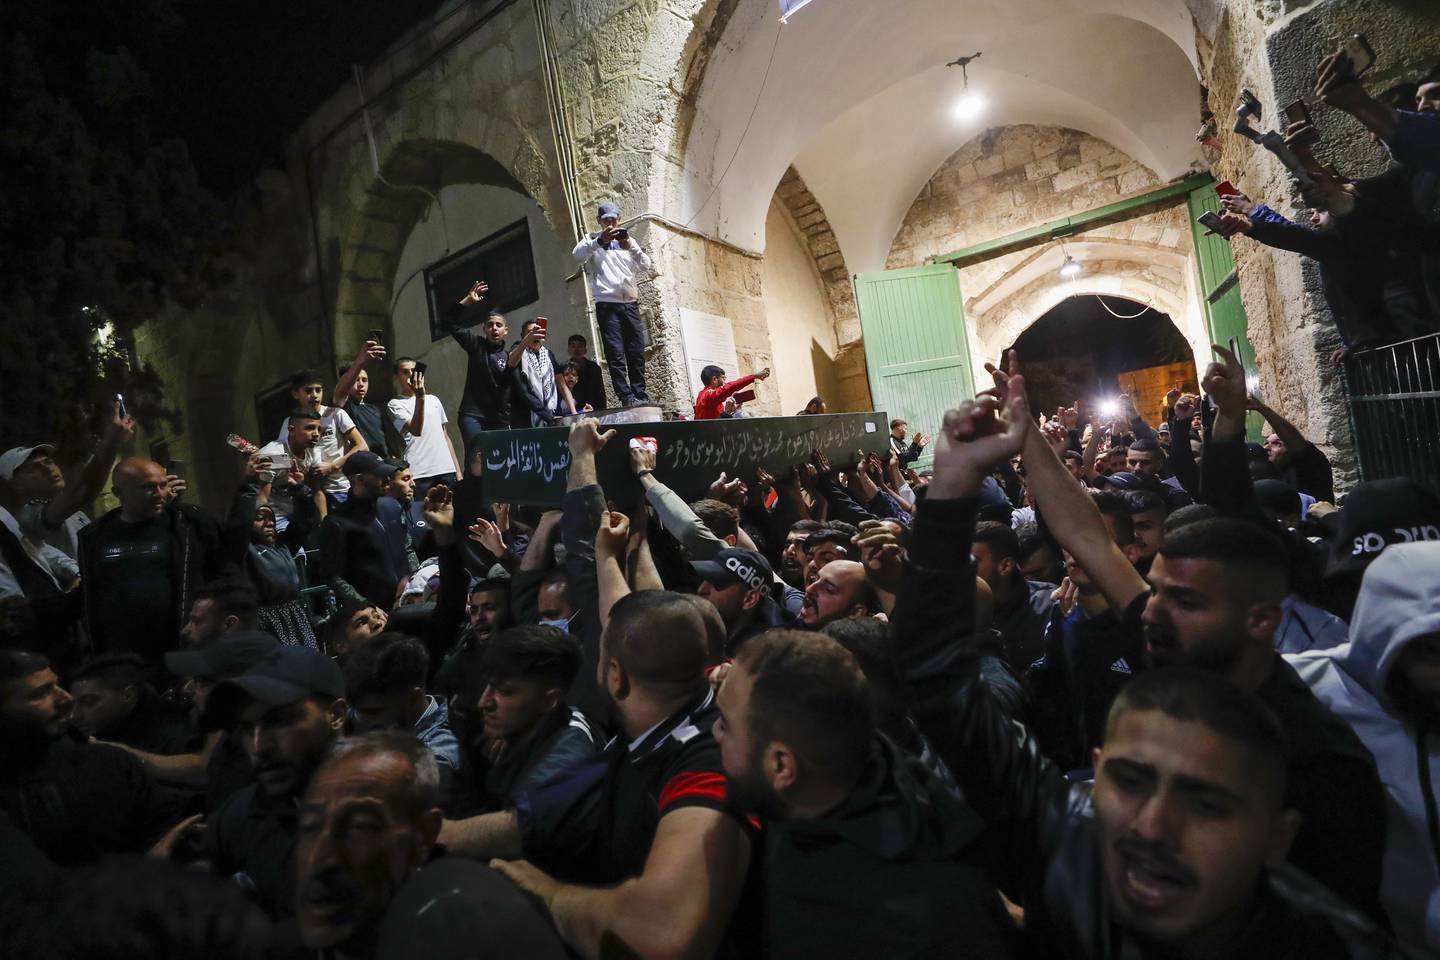 Palestinian mourners carry the coffin of Walid Shareef during his funeral at Al Aqsa Mosque compound in Jerusalem's Old City. EPA